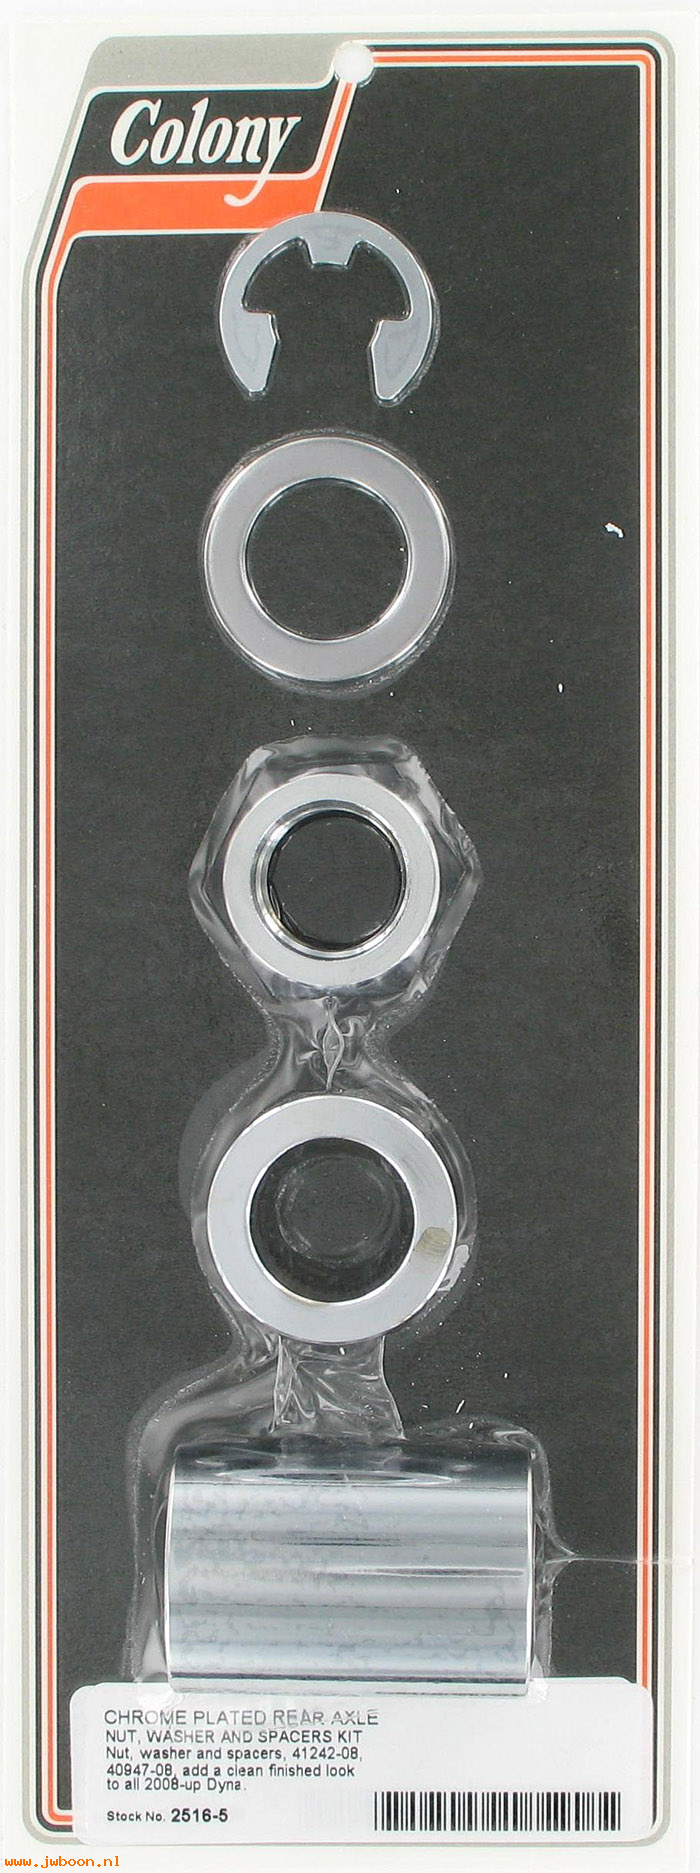 C 2516-5 (41242-08 / 40947-08): Rear axle spacer kit - smooth, in stock - FXD '08-